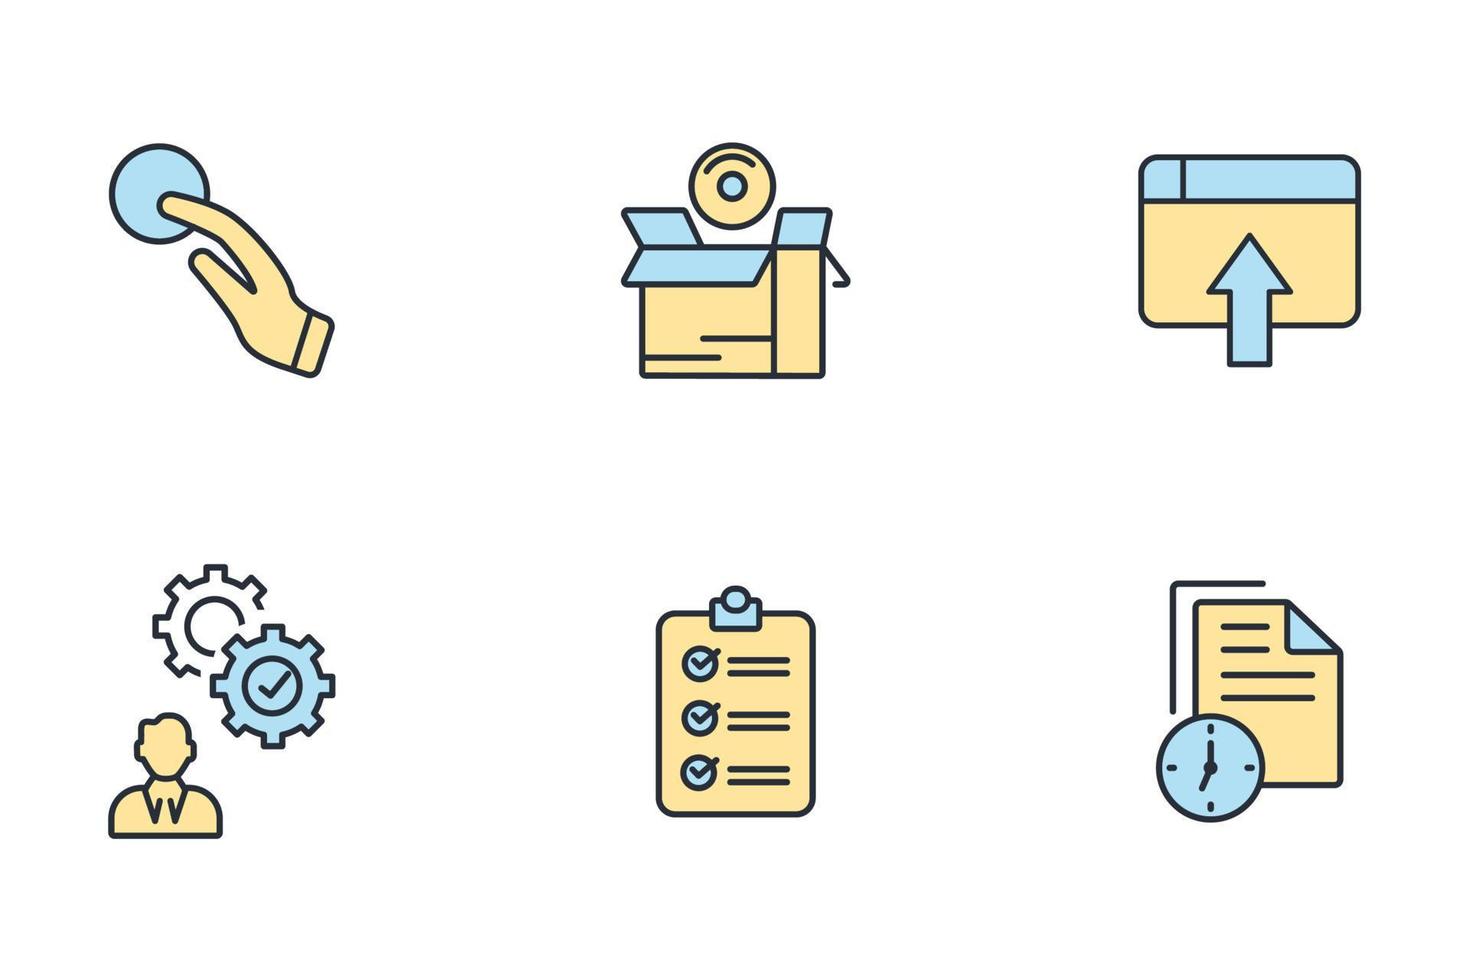 release managing icons set . release managing pack symbol vector elements for infographic web